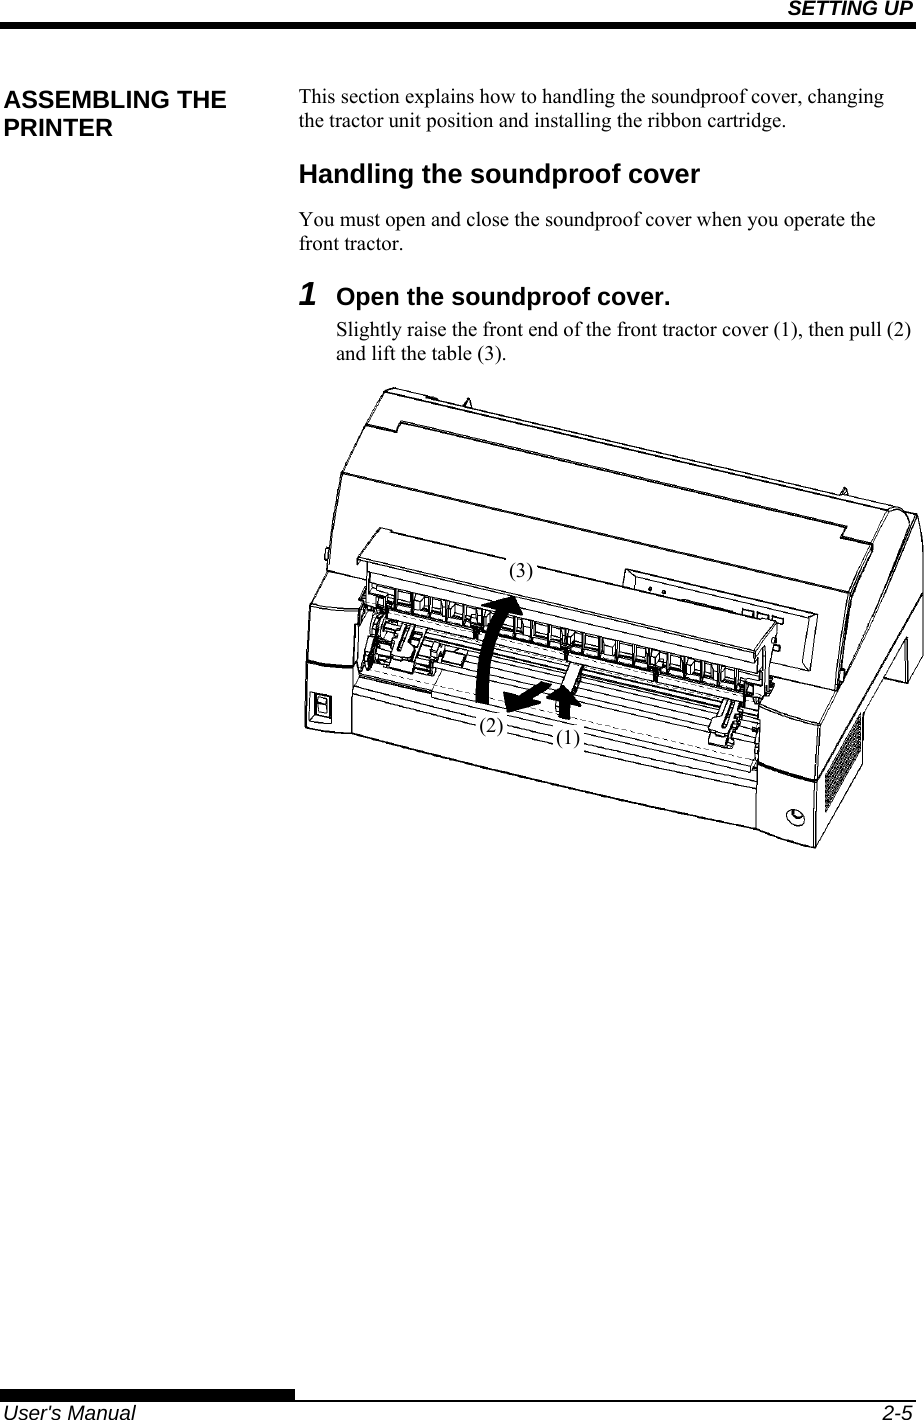 SETTING UP   User&apos;s Manual  2-5 This section explains how to handling the soundproof cover, changing the tractor unit position and installing the ribbon cartridge. Handling the soundproof cover You must open and close the soundproof cover when you operate the front tractor.  1  Open the soundproof cover. Slightly raise the front end of the front tractor cover (1), then pull (2) and lift the table (3).  ASSEMBLING THE PRINTER (1)(2)(3)